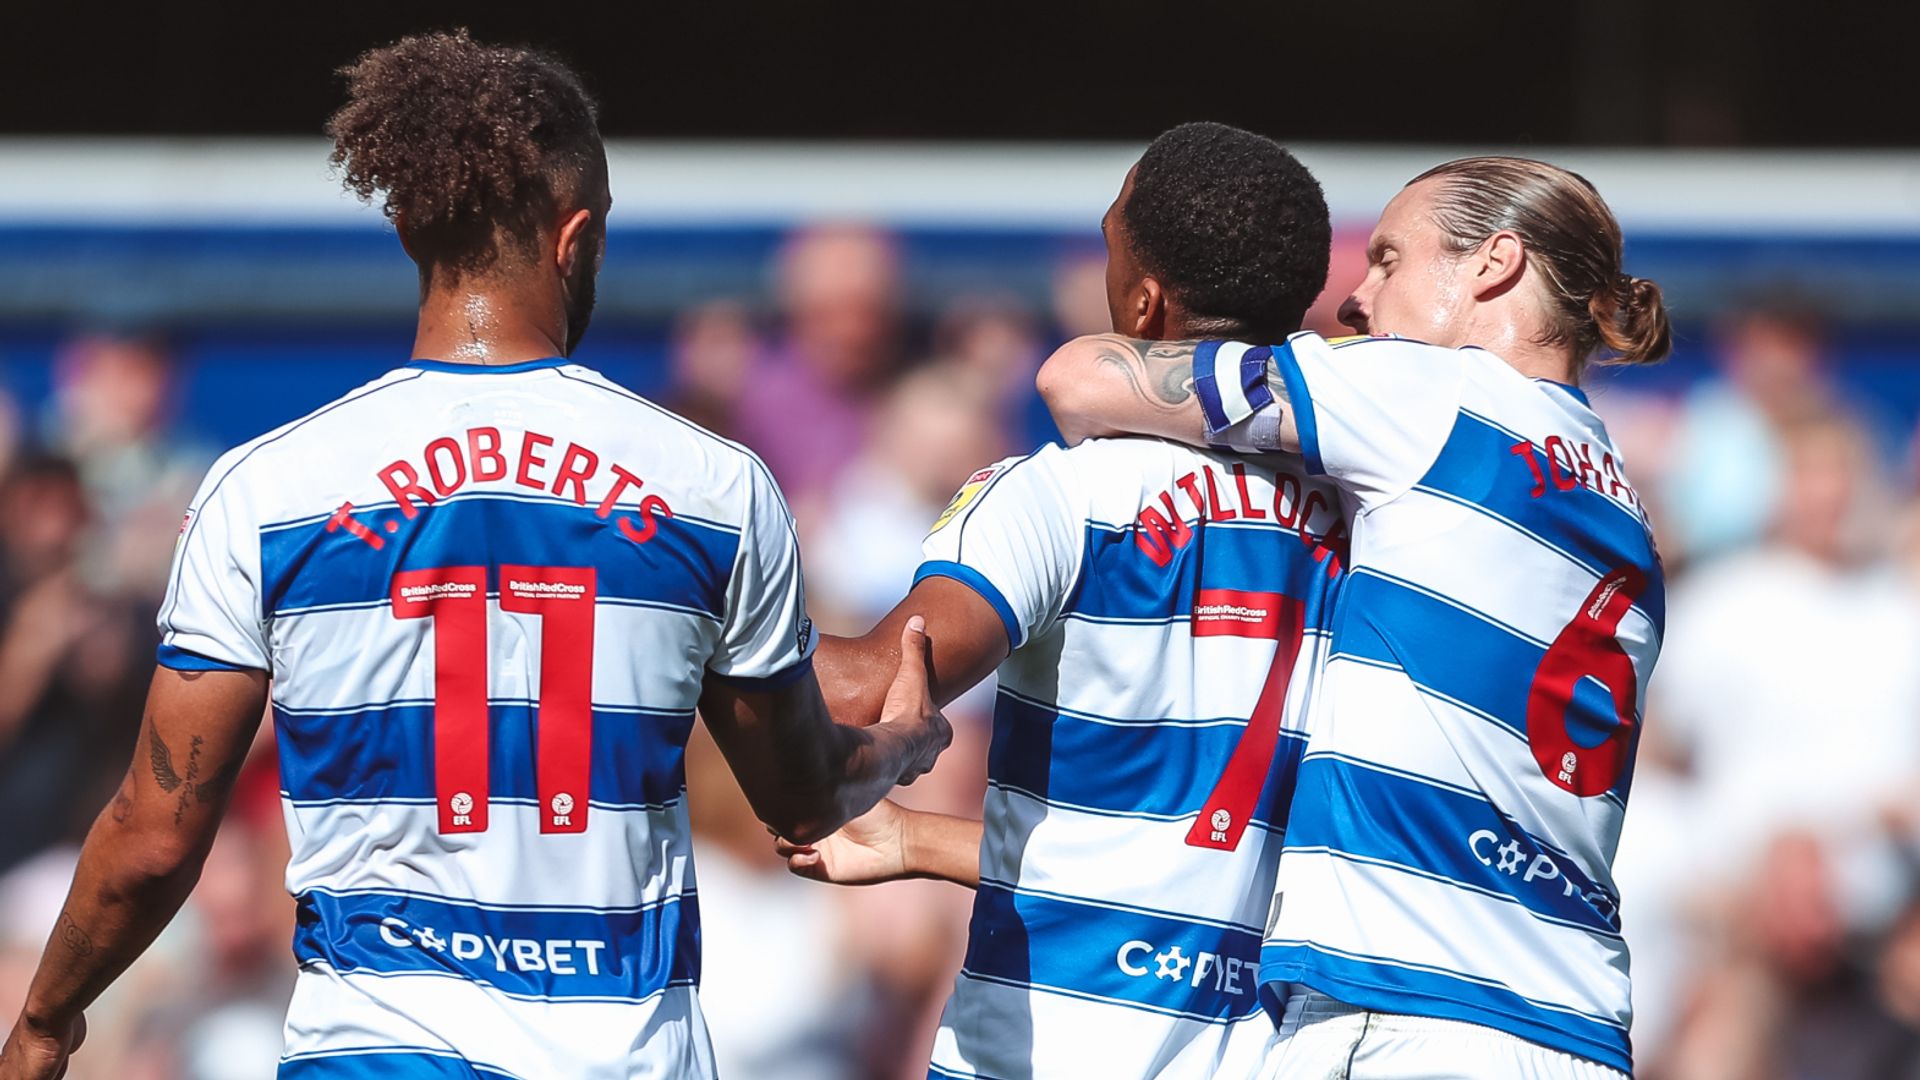 Willock earns point for QPR